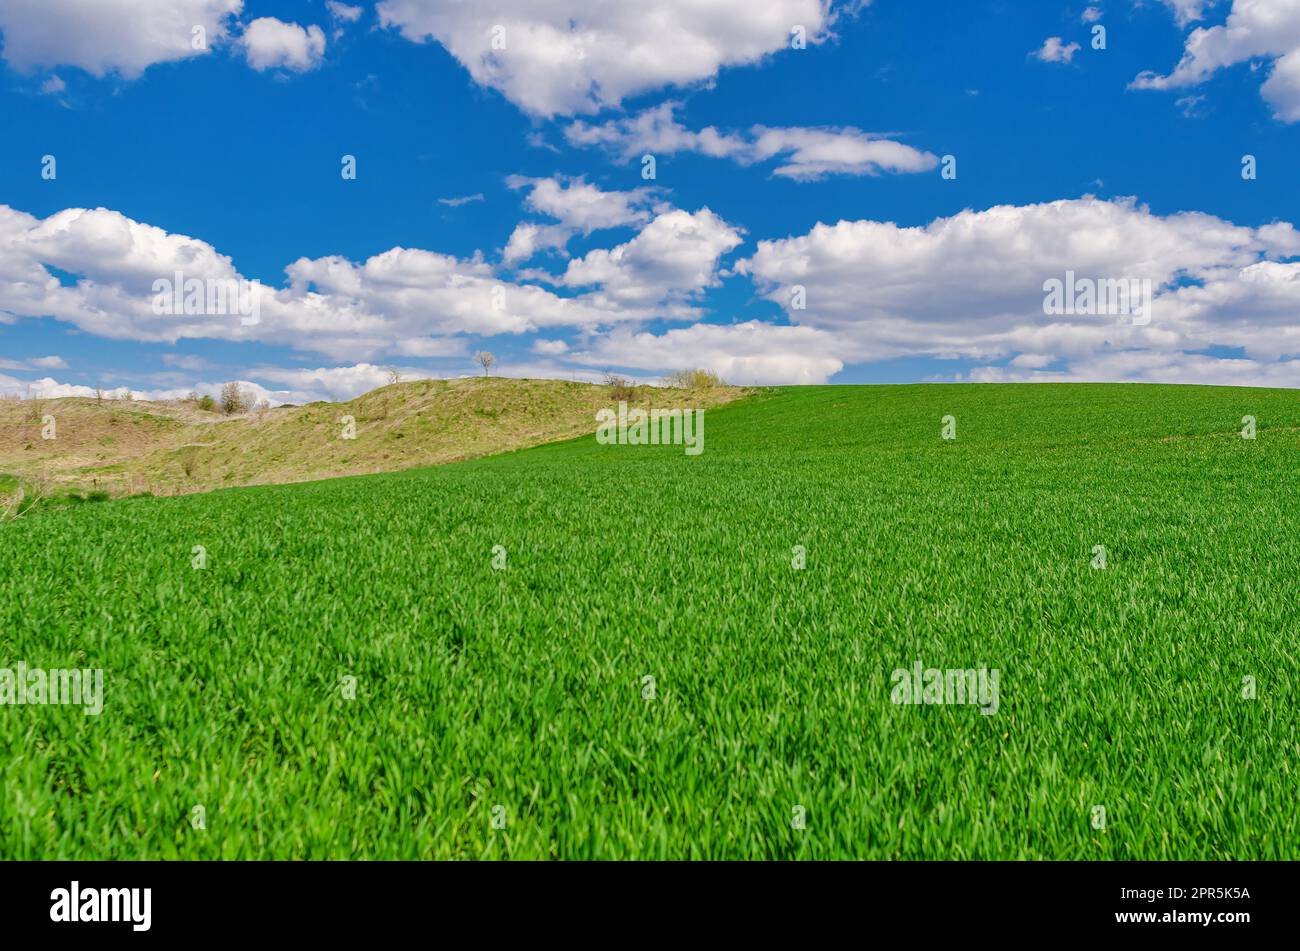 Field of green young winter crops under blue sky with clouds. Windows XP style wallpaper Stock Photo